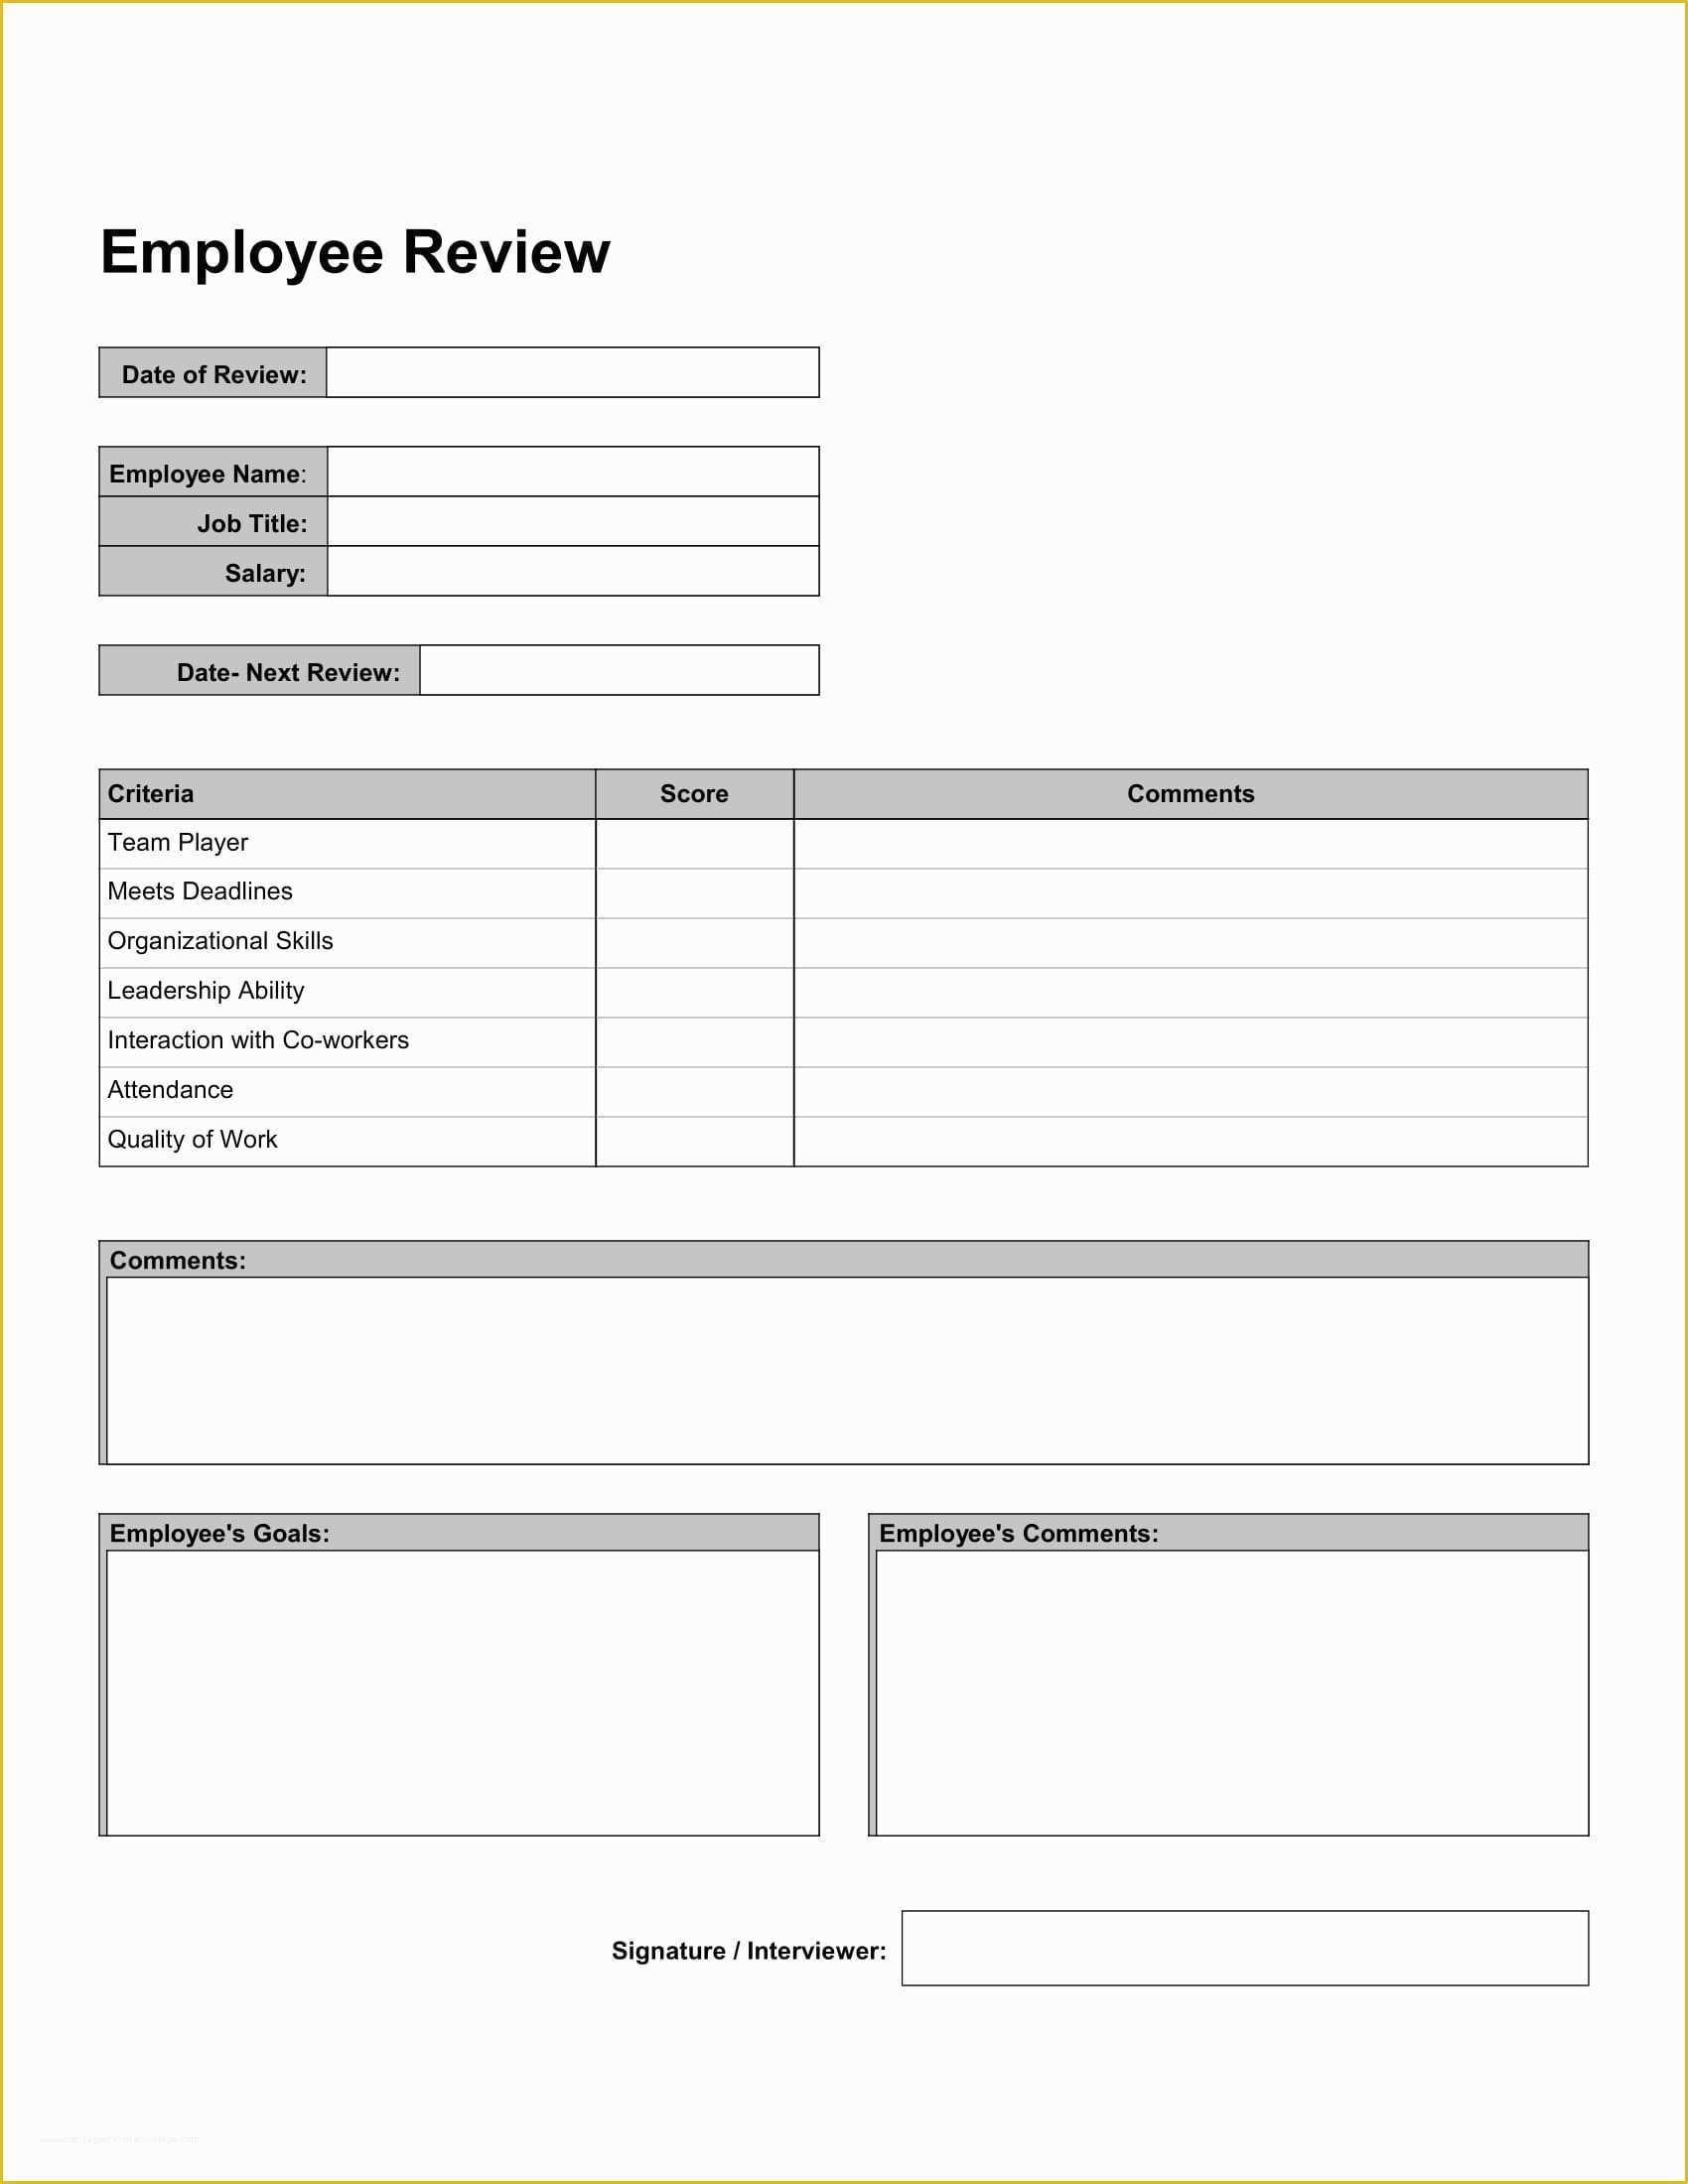 Employee Review form Template Free Of 10 Work Review forms Free Word Pdf format Download